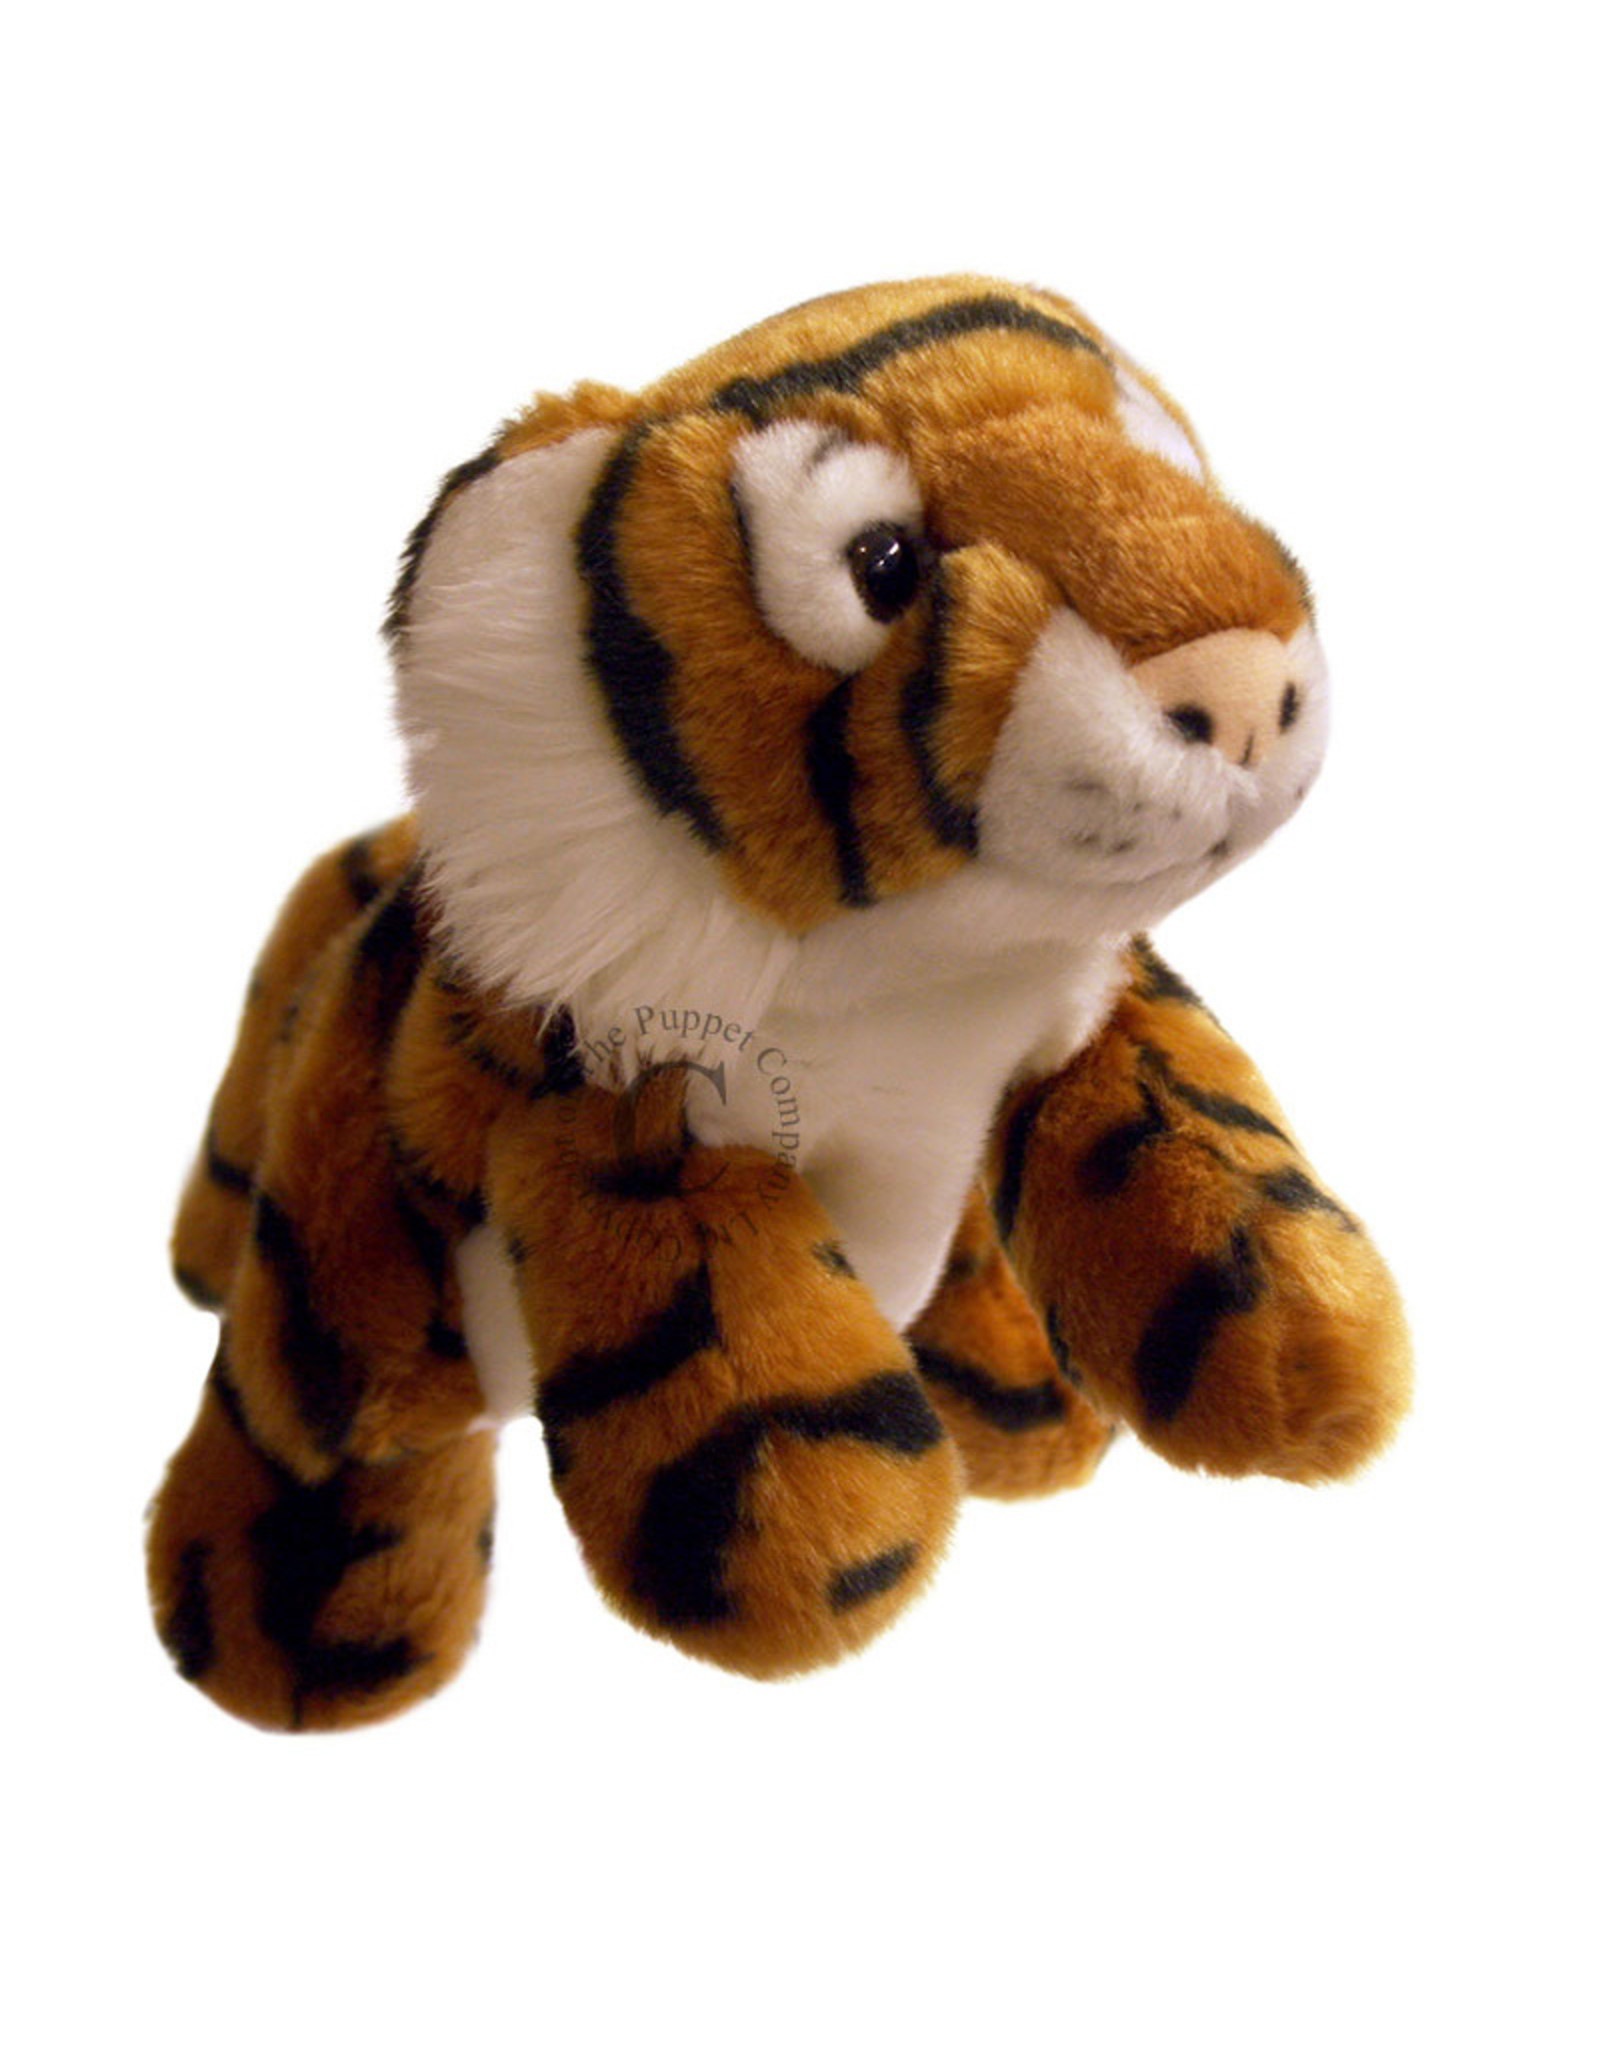 The Puppet Company Ltd Full-Bodied Puppets: Tiger